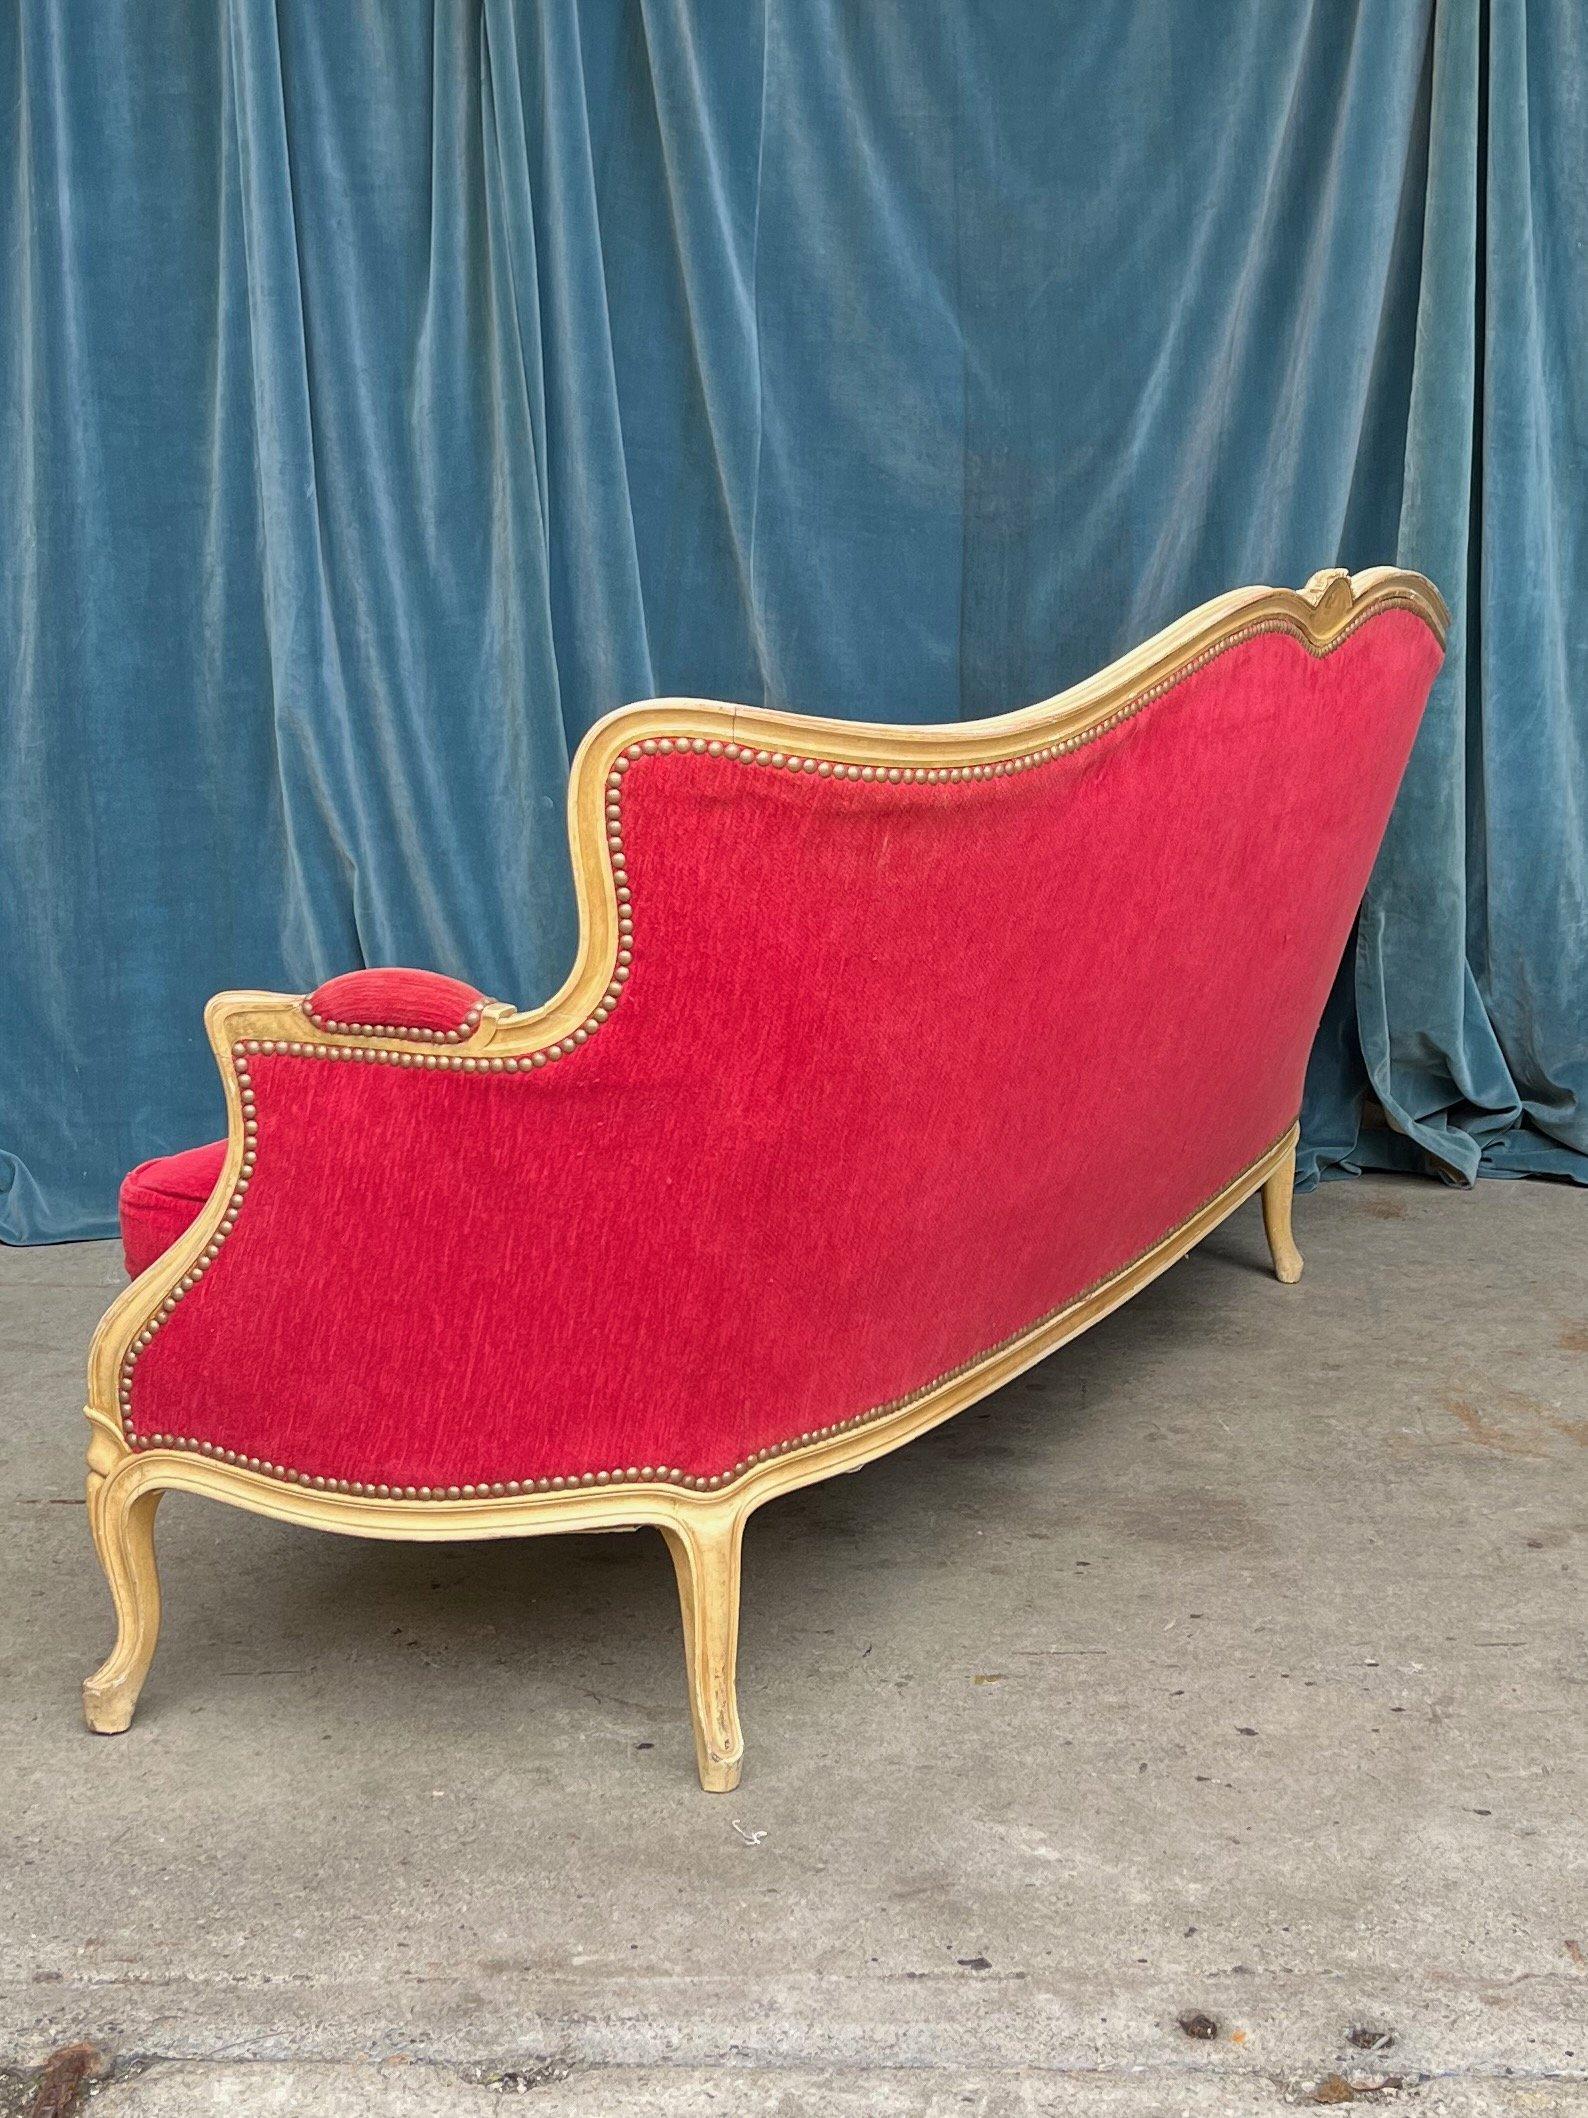 Early 20th Century French Louis XV Style Settee in Red Velvet For Sale